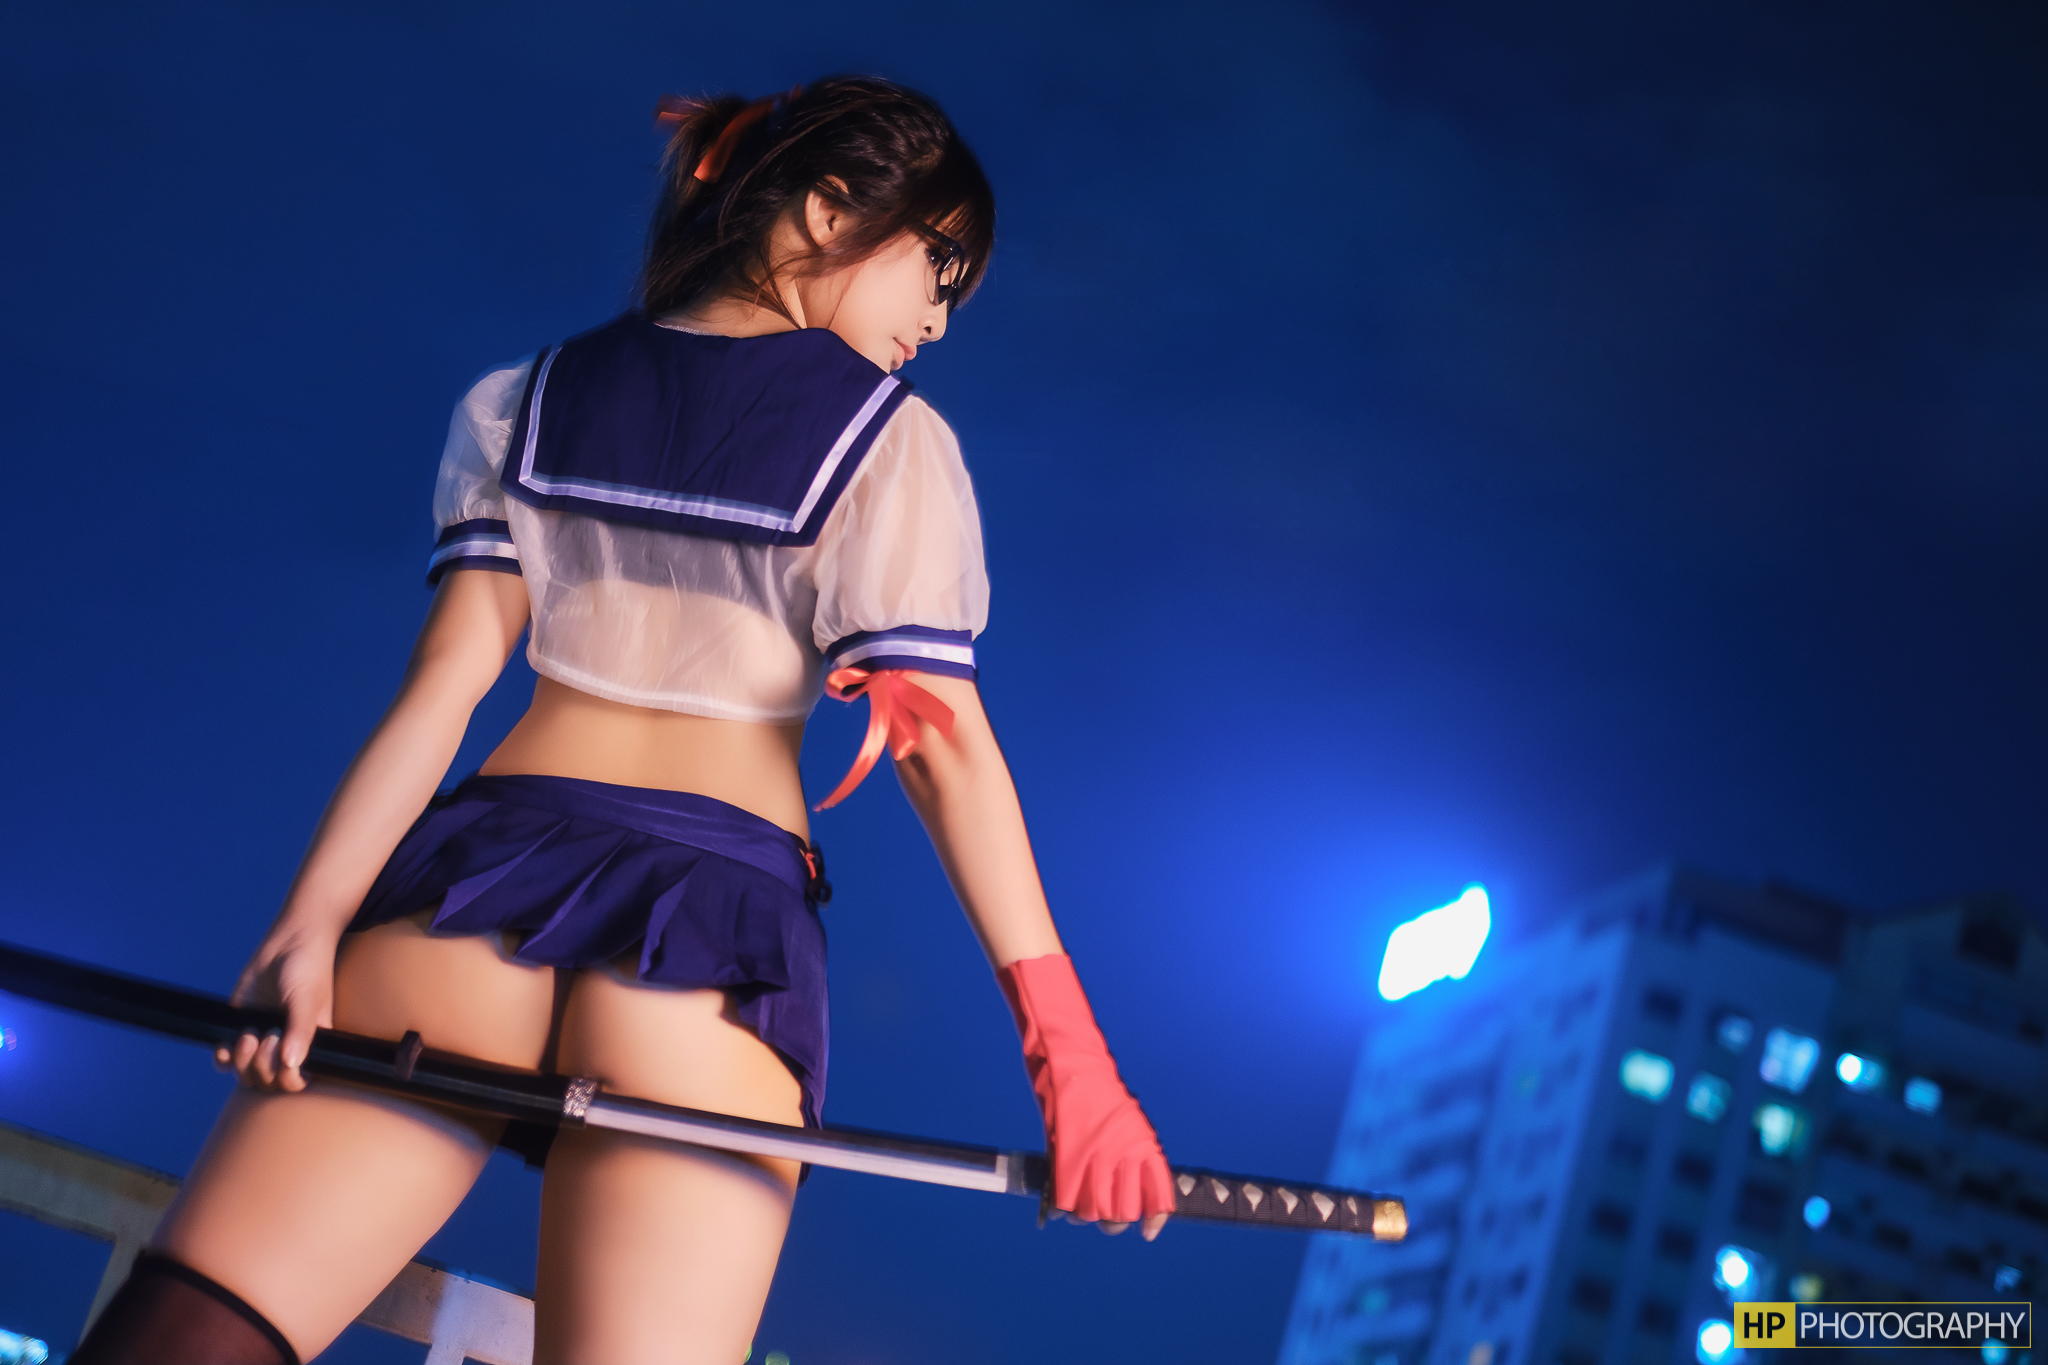 People 2048x1365 women cosplay Asian brunette ponytail profile looking away women with glasses back sailor uniform schoolgirl upskirt ass panties thigh-highs katana weapon sky building night outdoors women outdoors low-angle MiMi Chan